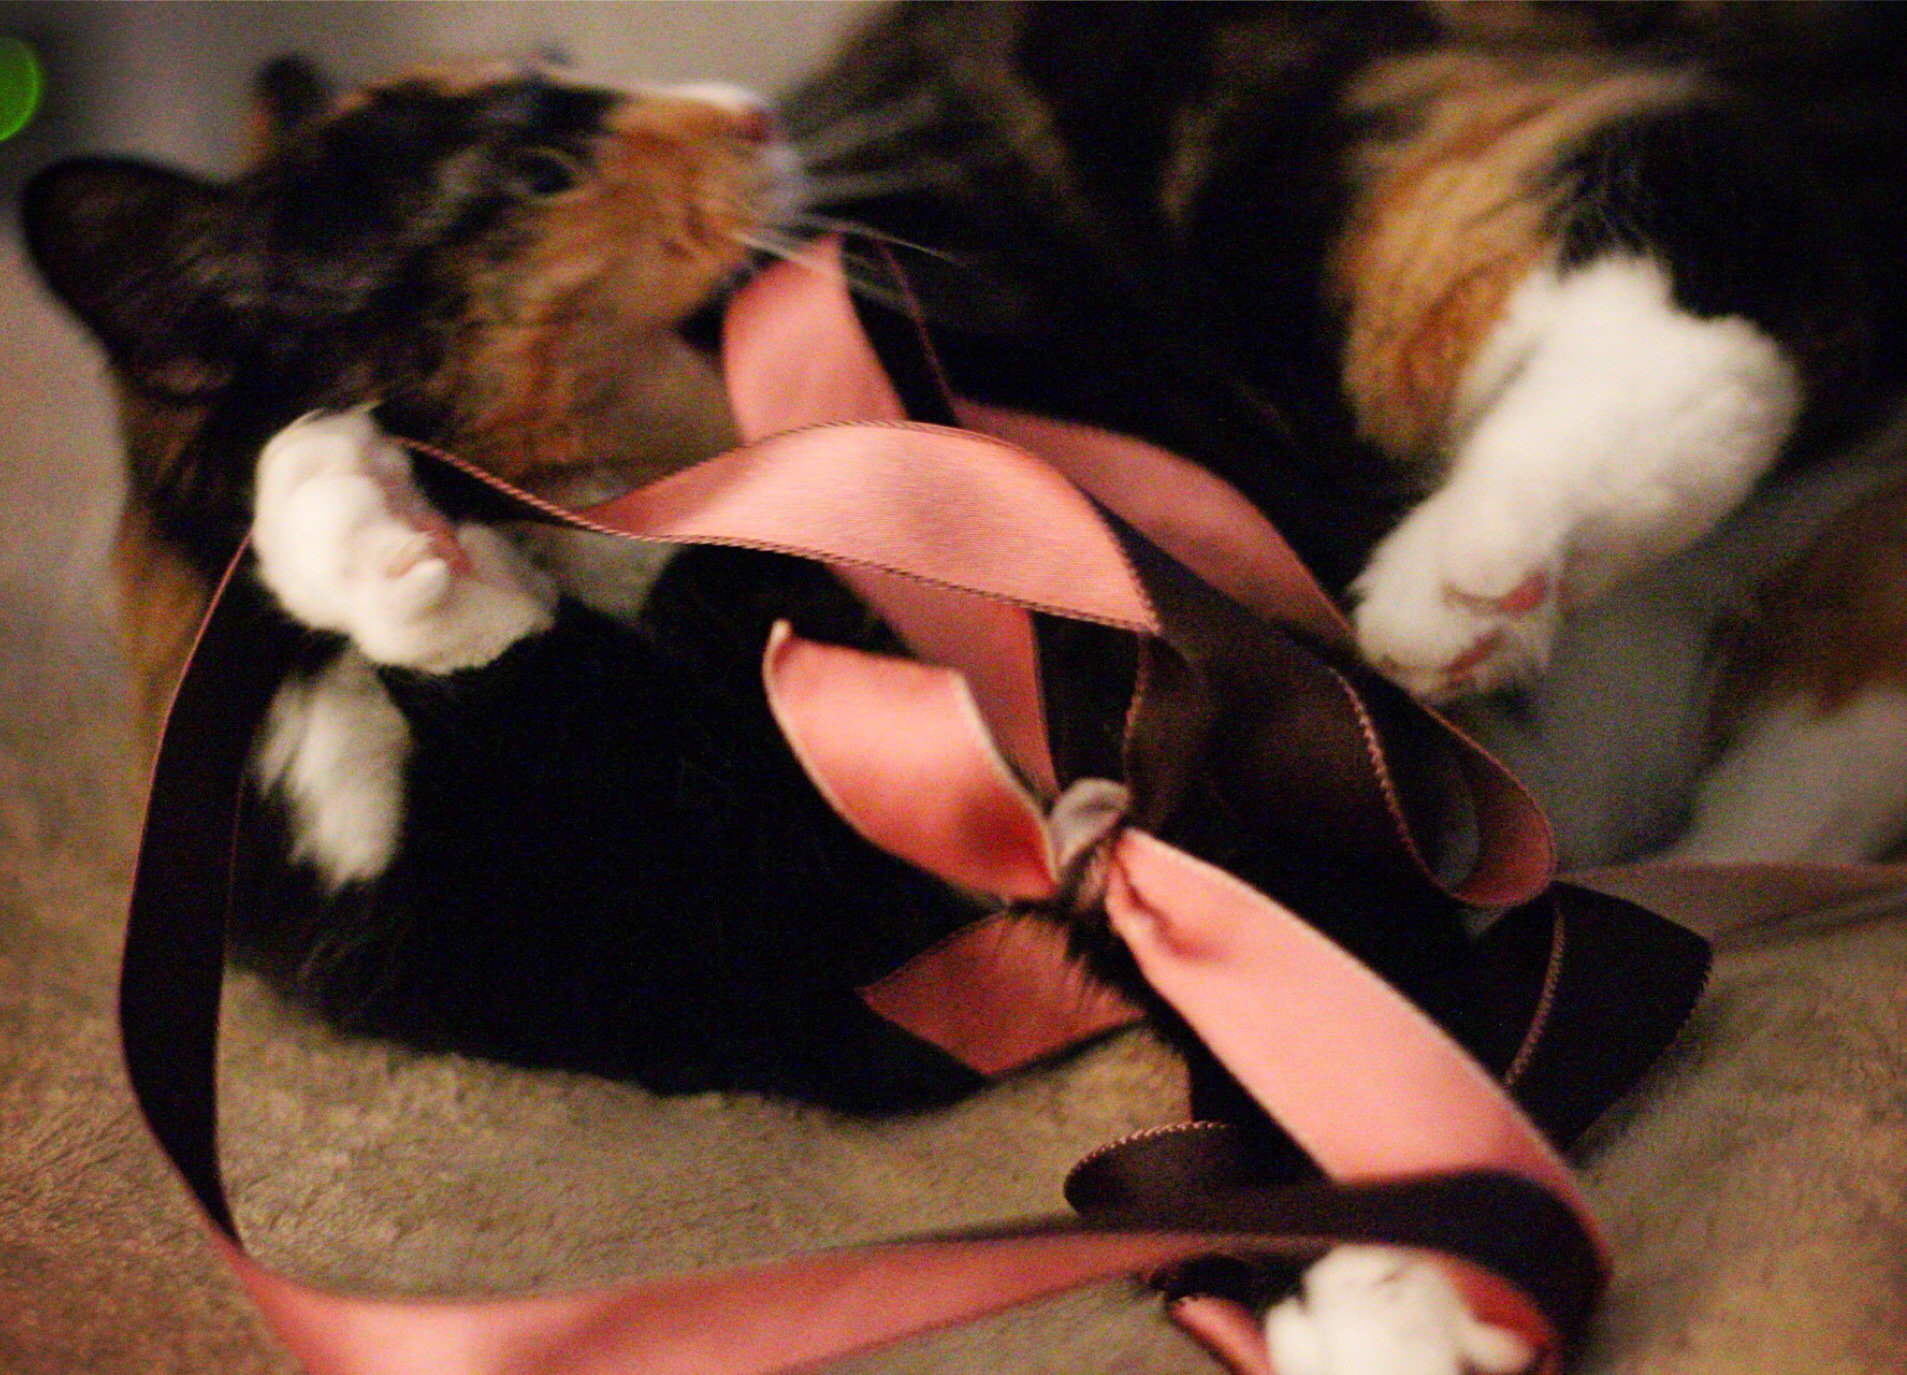 https://www.askamanager.org/wp-content/uploads/2015/03/Olive-with-ribbon.jpg